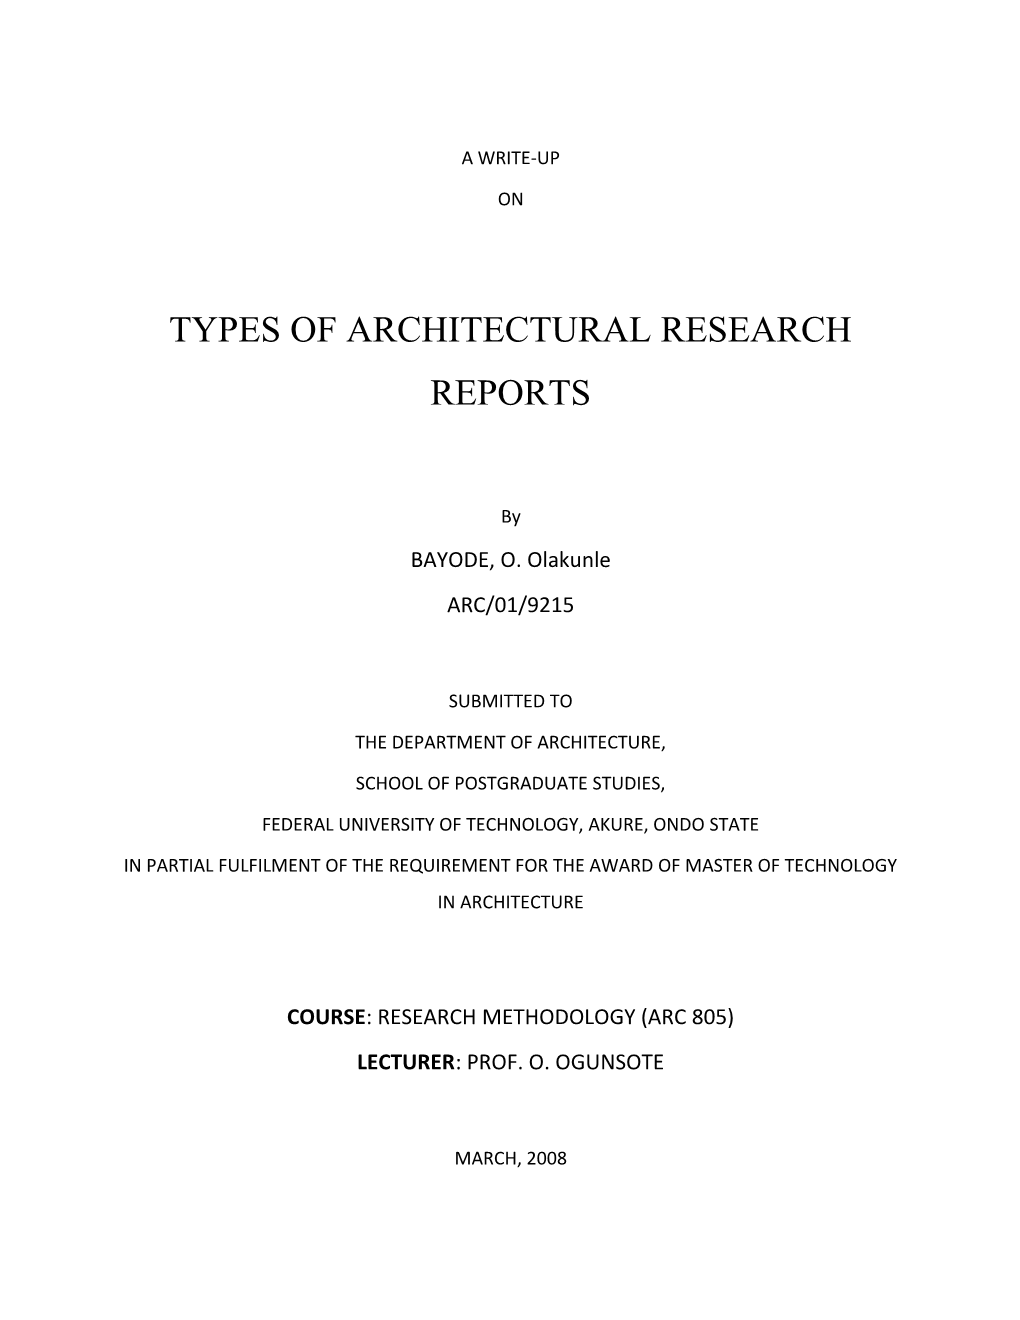 Types of Architectural Research Reports